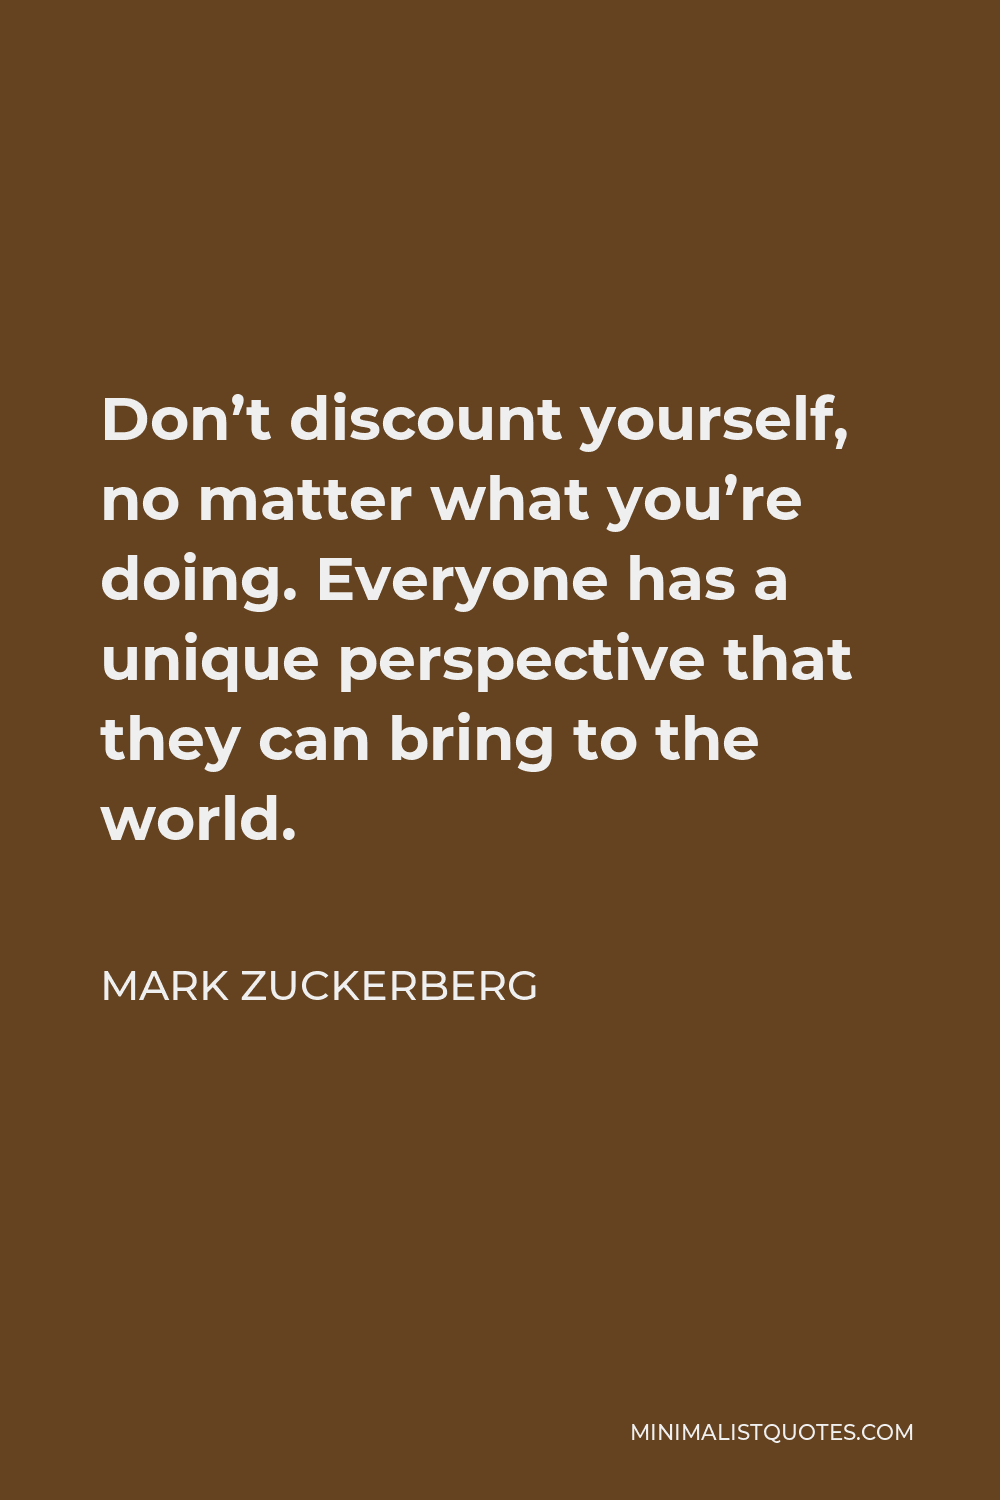 Mark Zuckerberg Quote - Don’t discount yourself, no matter what you’re doing. Everyone has a unique perspective that they can bring to the world.